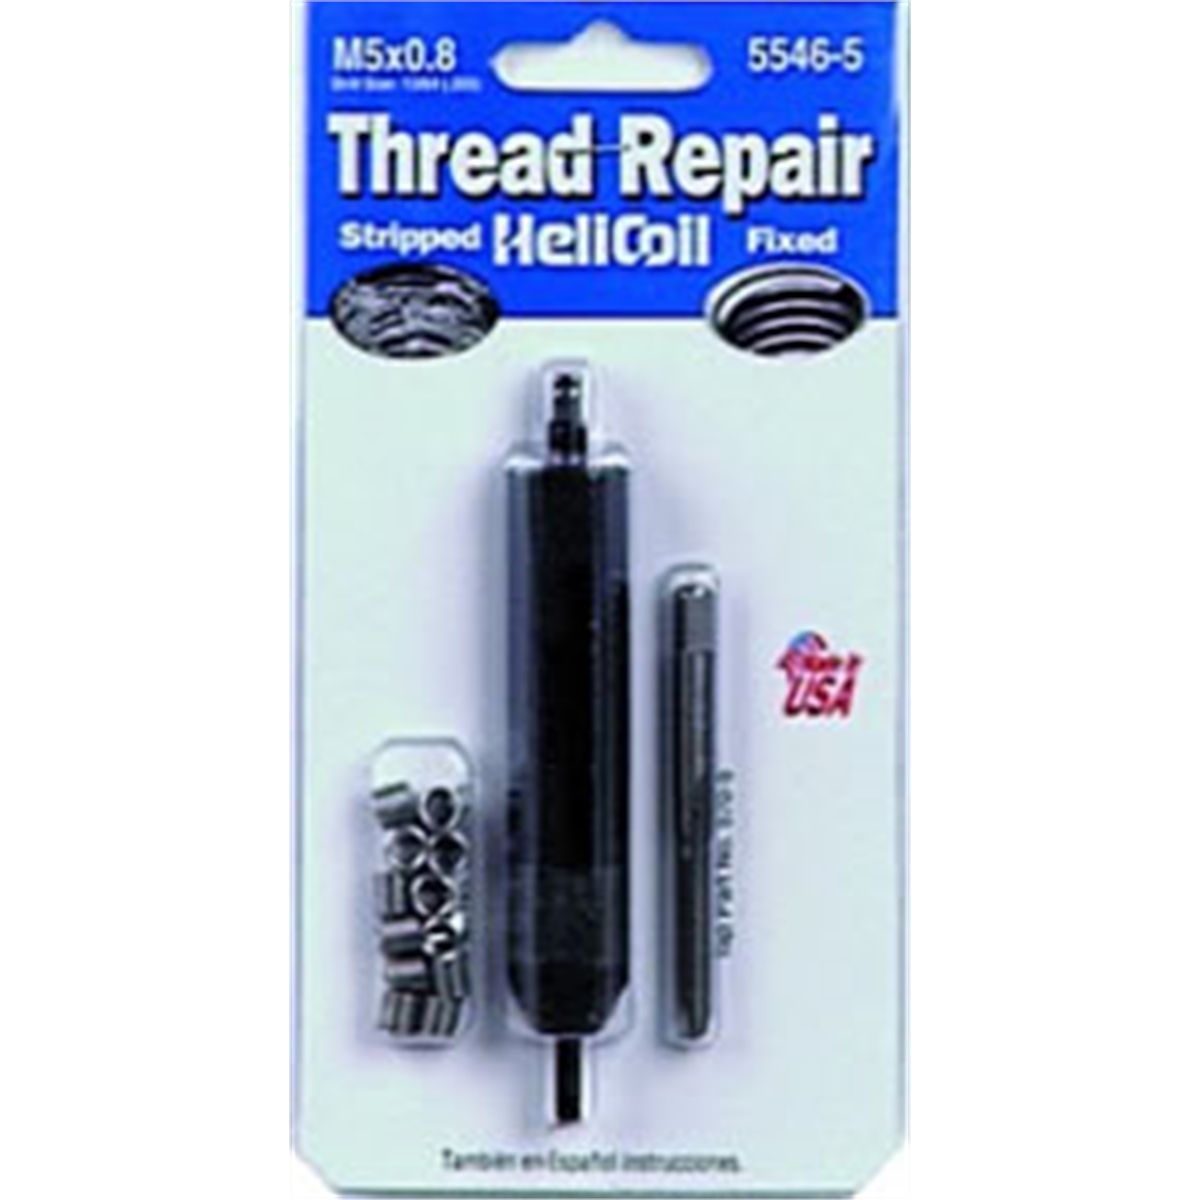 HeliCoil 6-32 x .207 inch Thread Repair Inserts Qty 25 